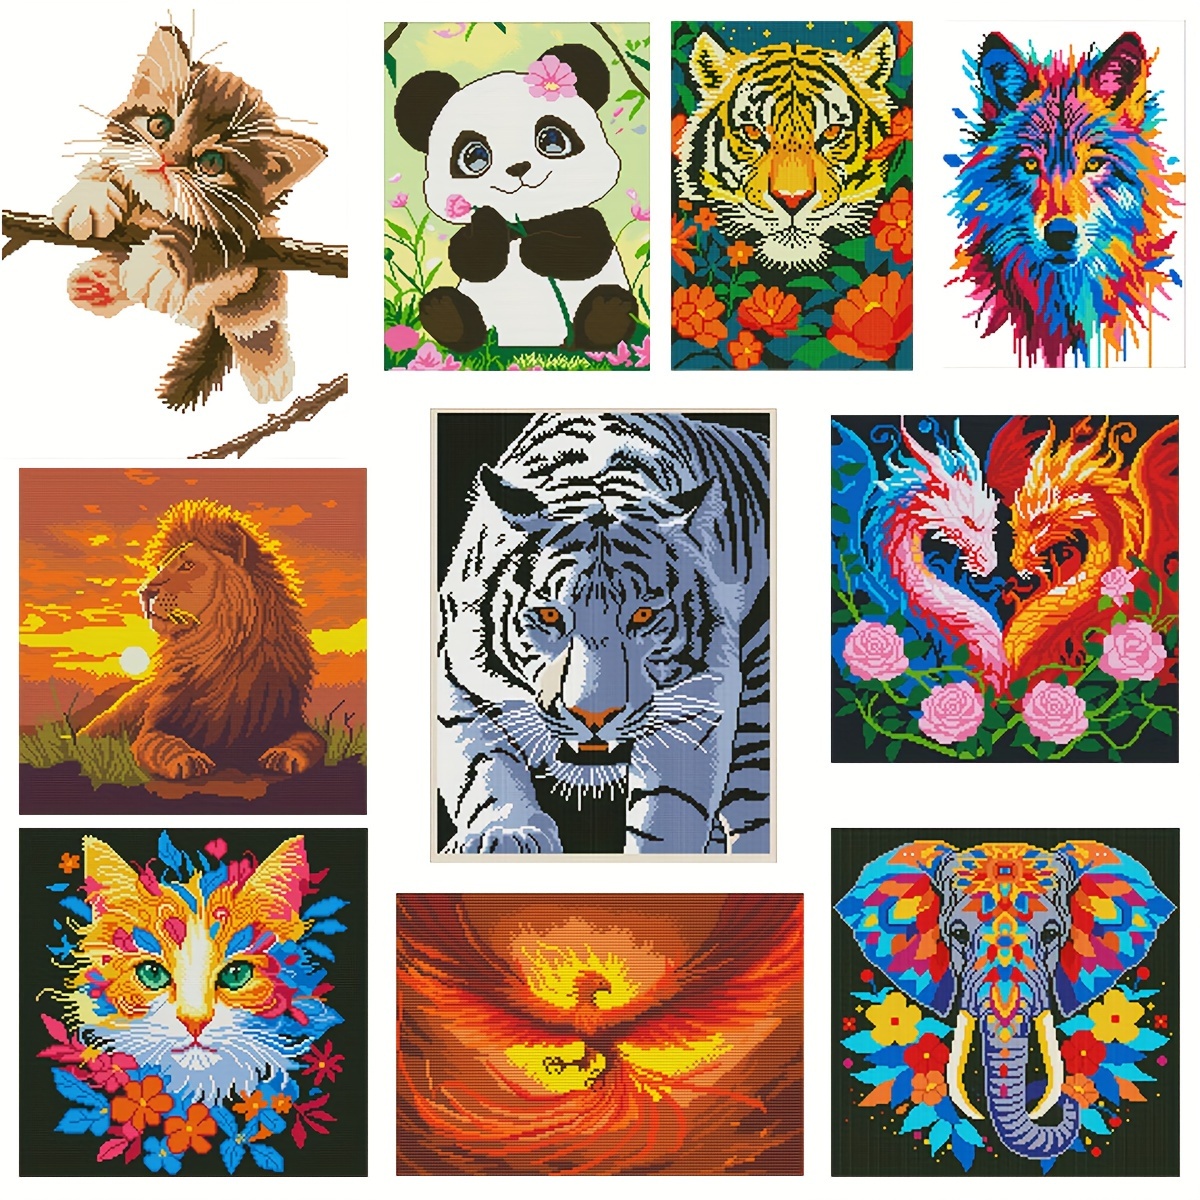 

Animal Series Cross Stitch Kit - Panda, Cat, White Tiger, Phoenix, Wolf, Heart Dragon, Lion, - 11ct Medium Grid Embroidery Set For Beginners With Pre-printed Fabric And Threads